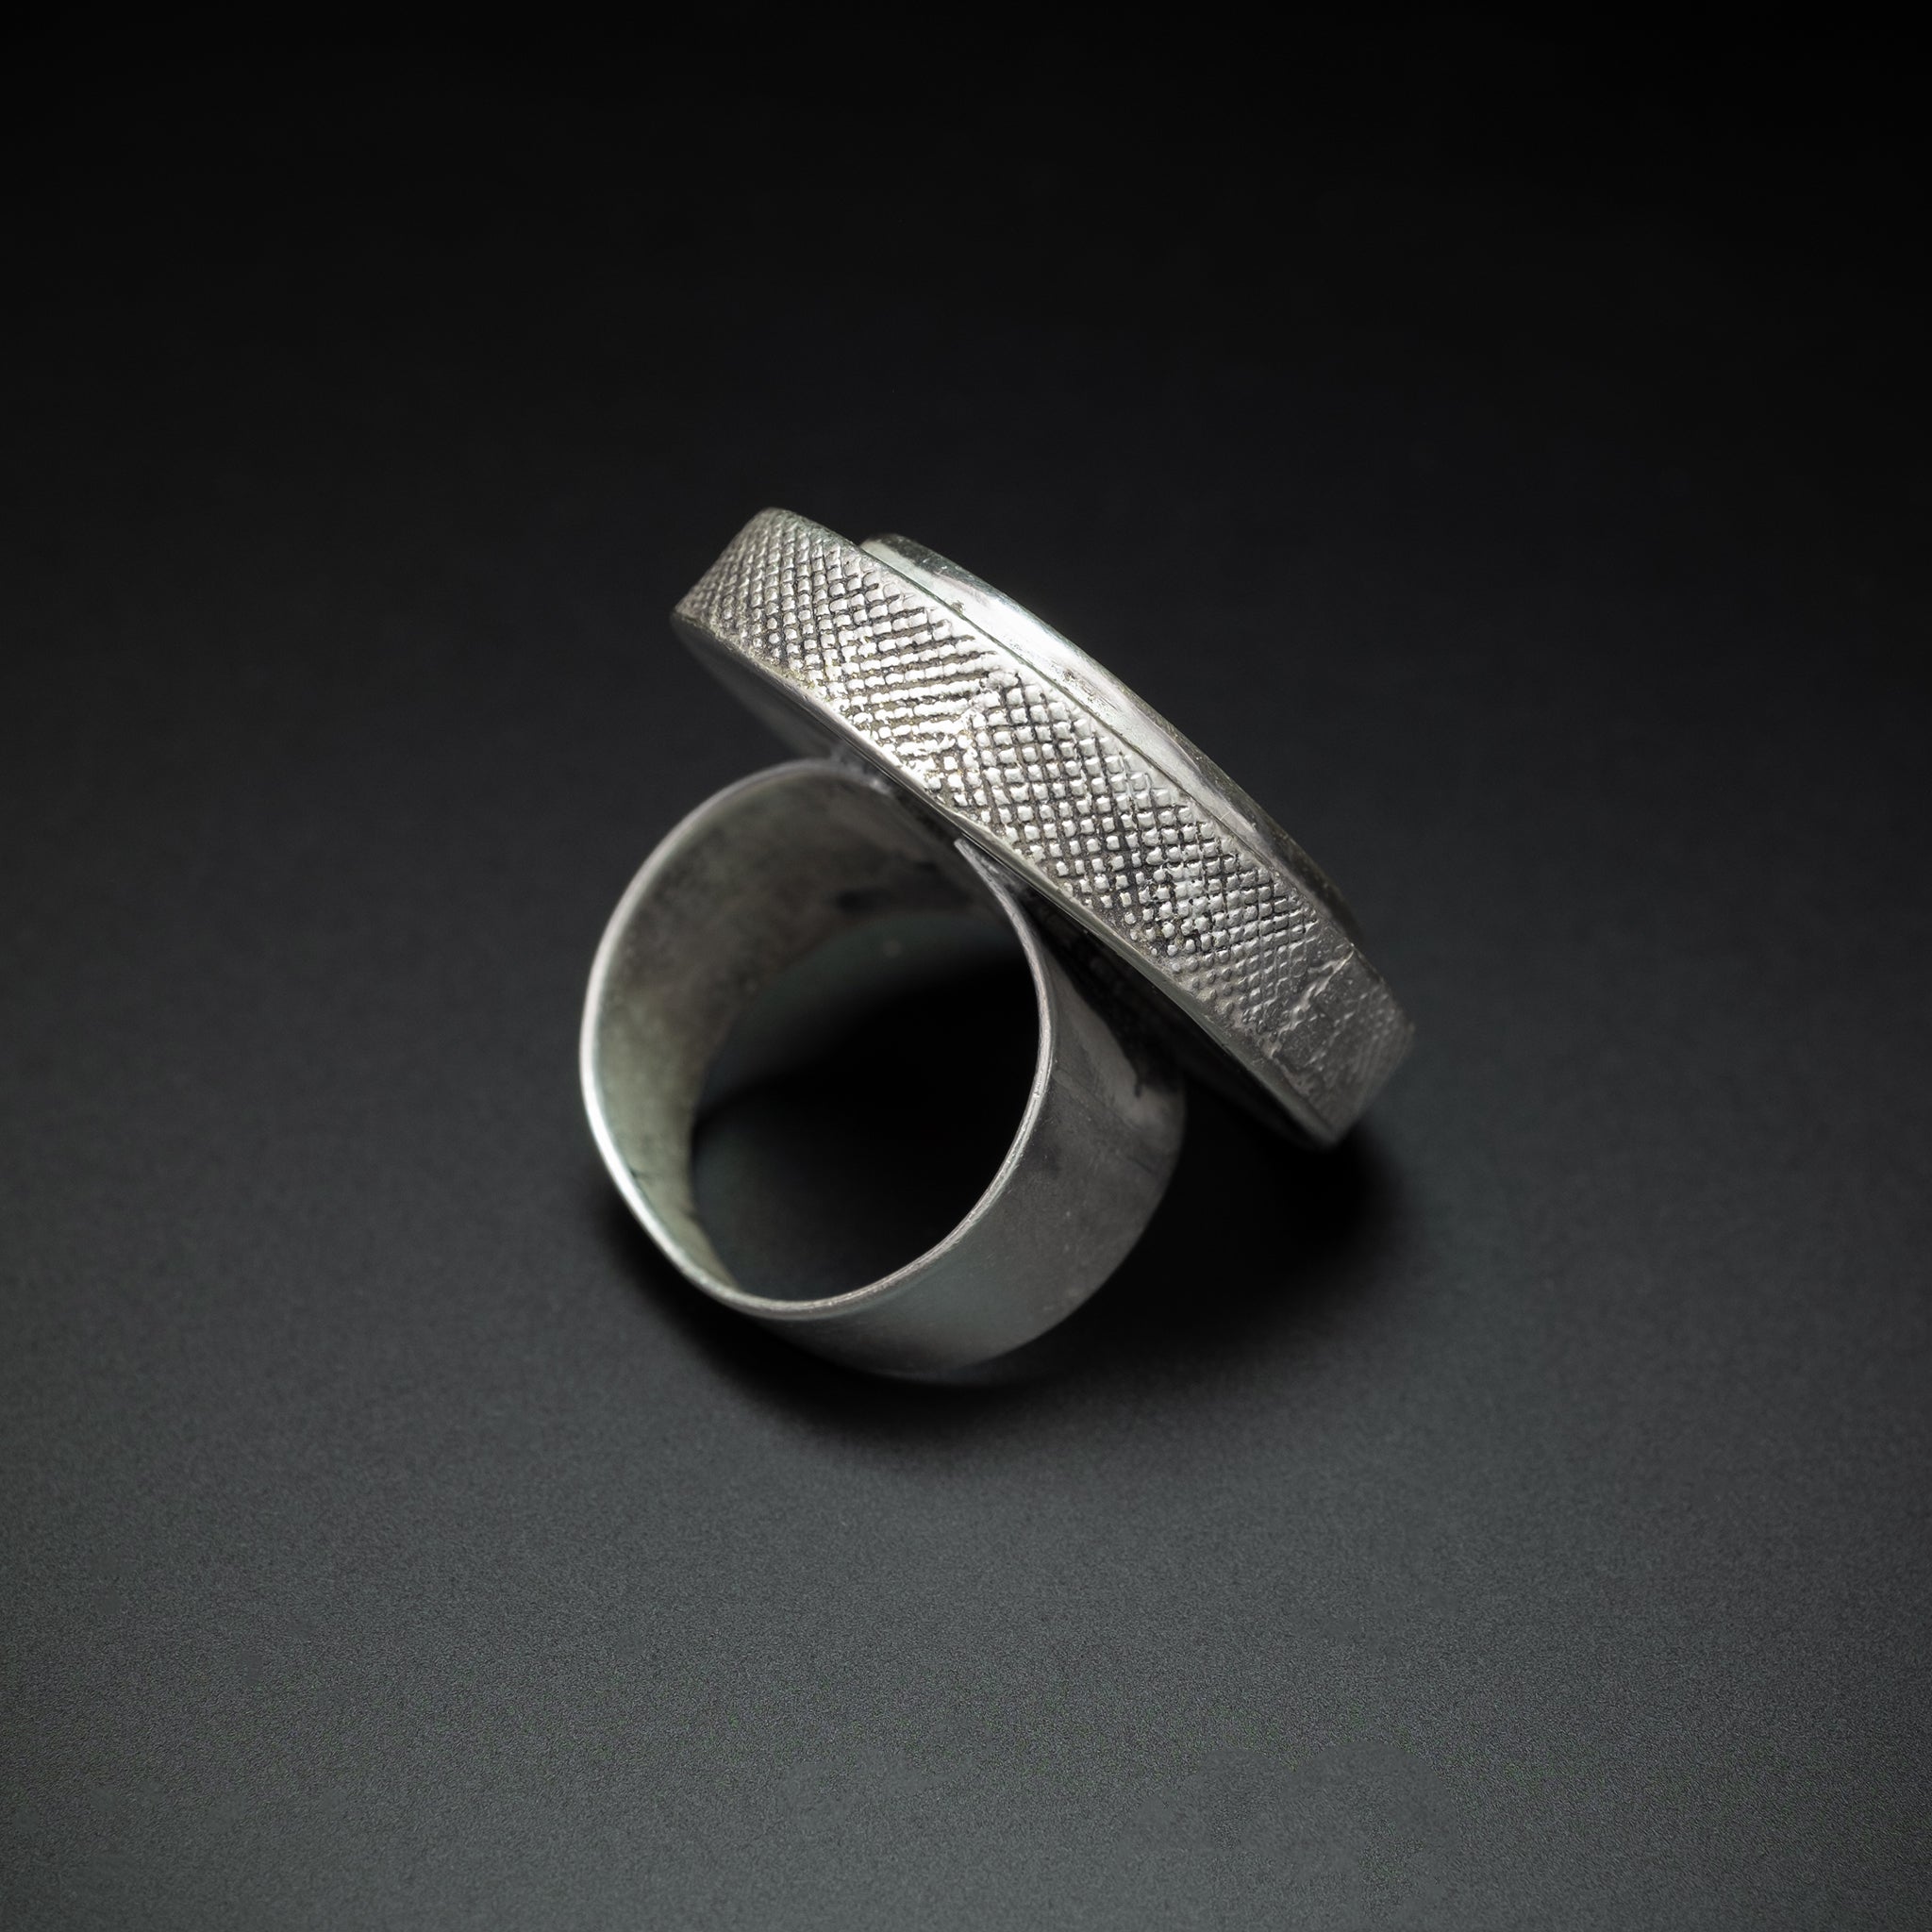 Authentic Old Silver Kazakh Ring, Central Asia